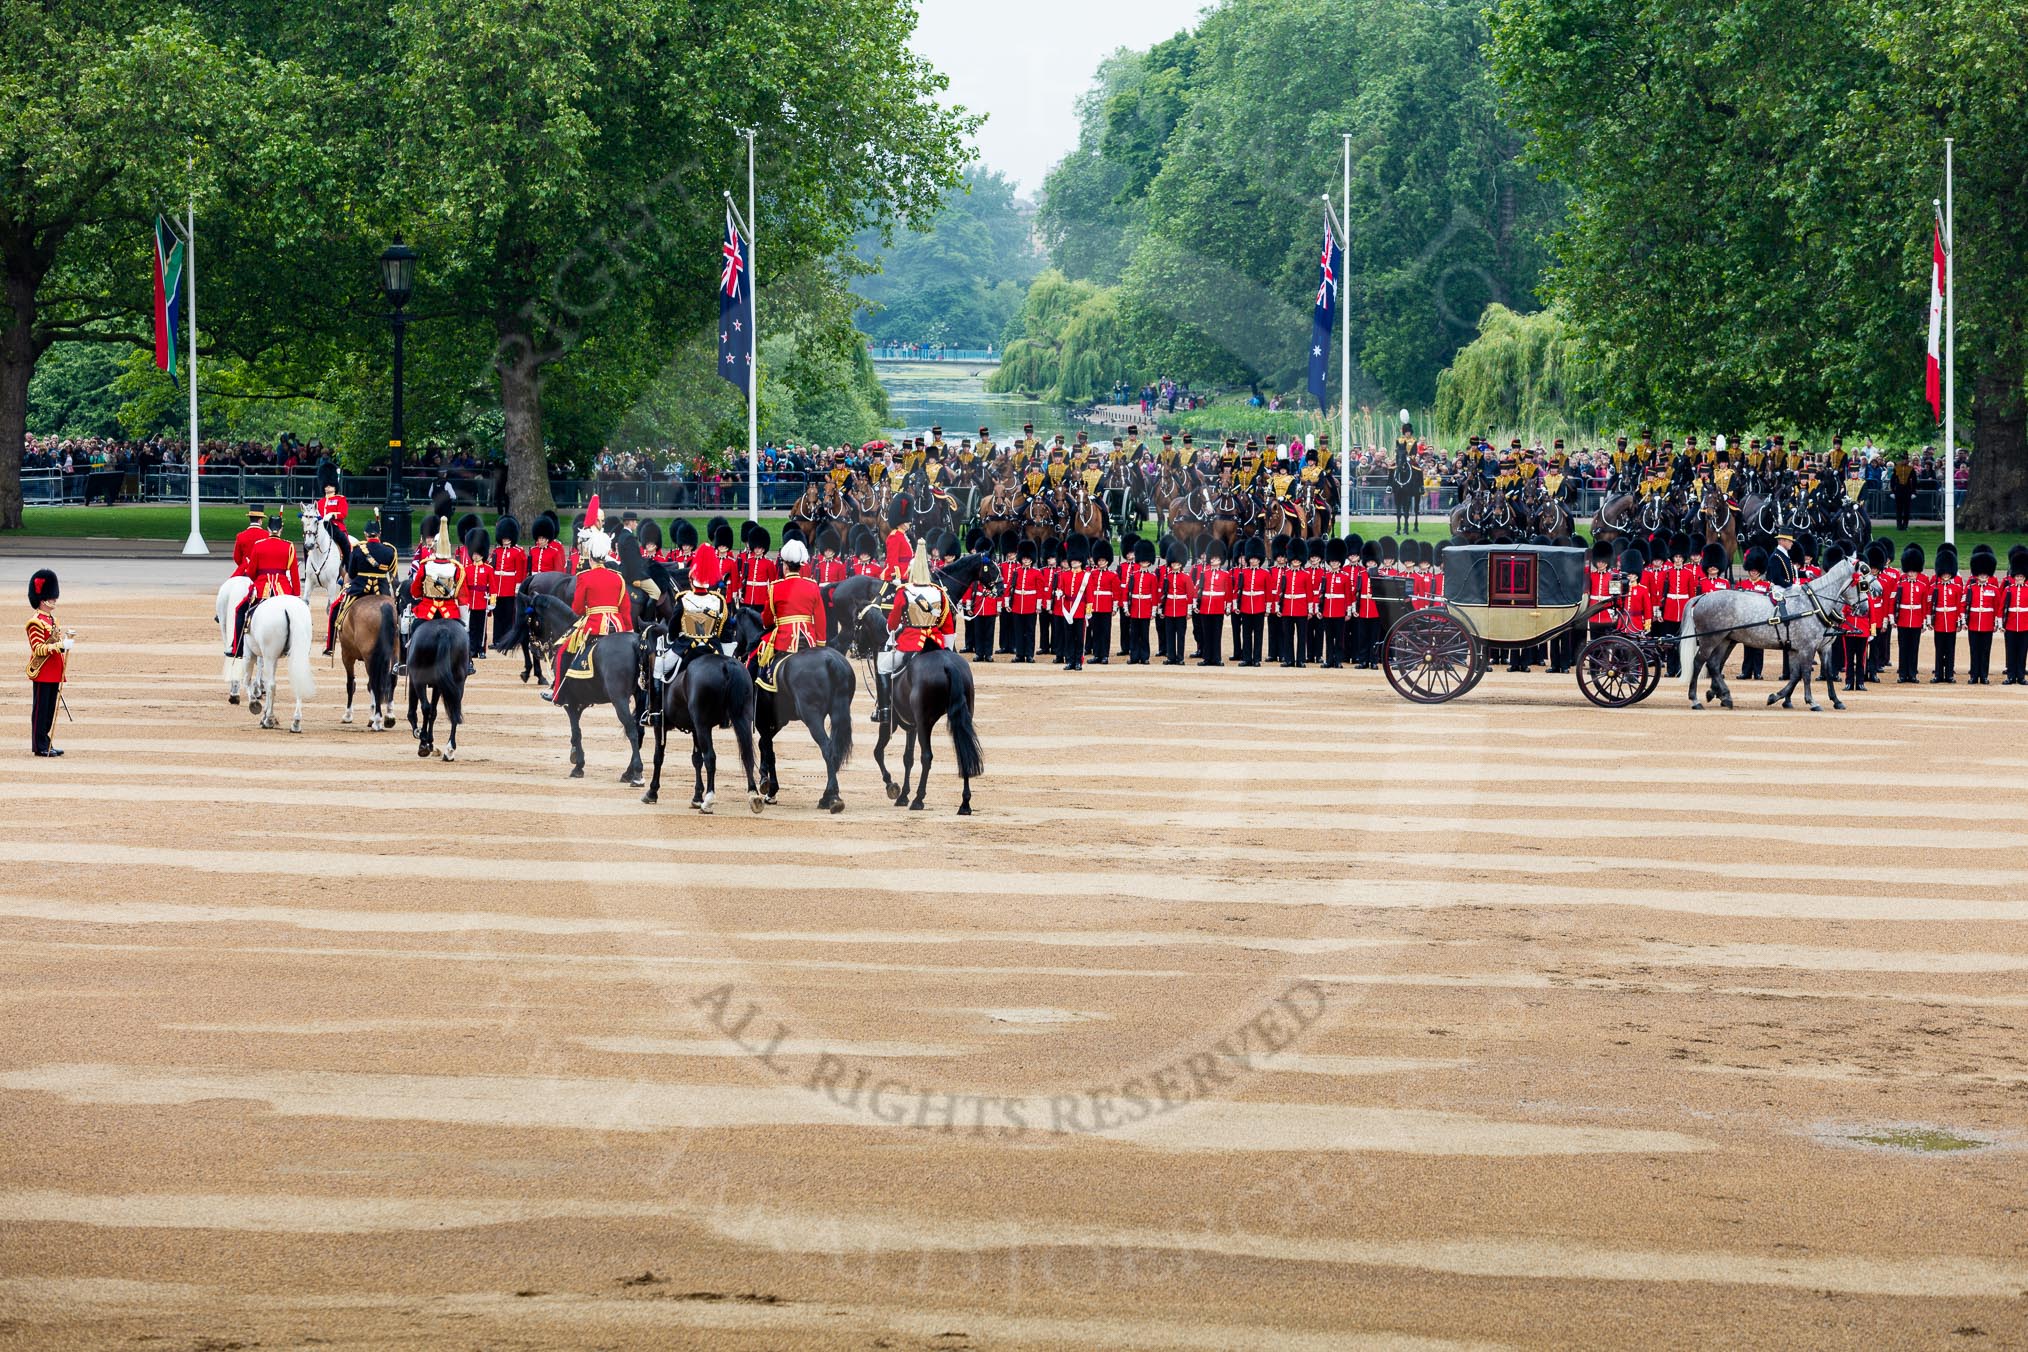 The Colonel's Review 2016.
Horse Guards Parade, Westminster,
London,

United Kingdom,
on 04 June 2016 at 11:02, image #195